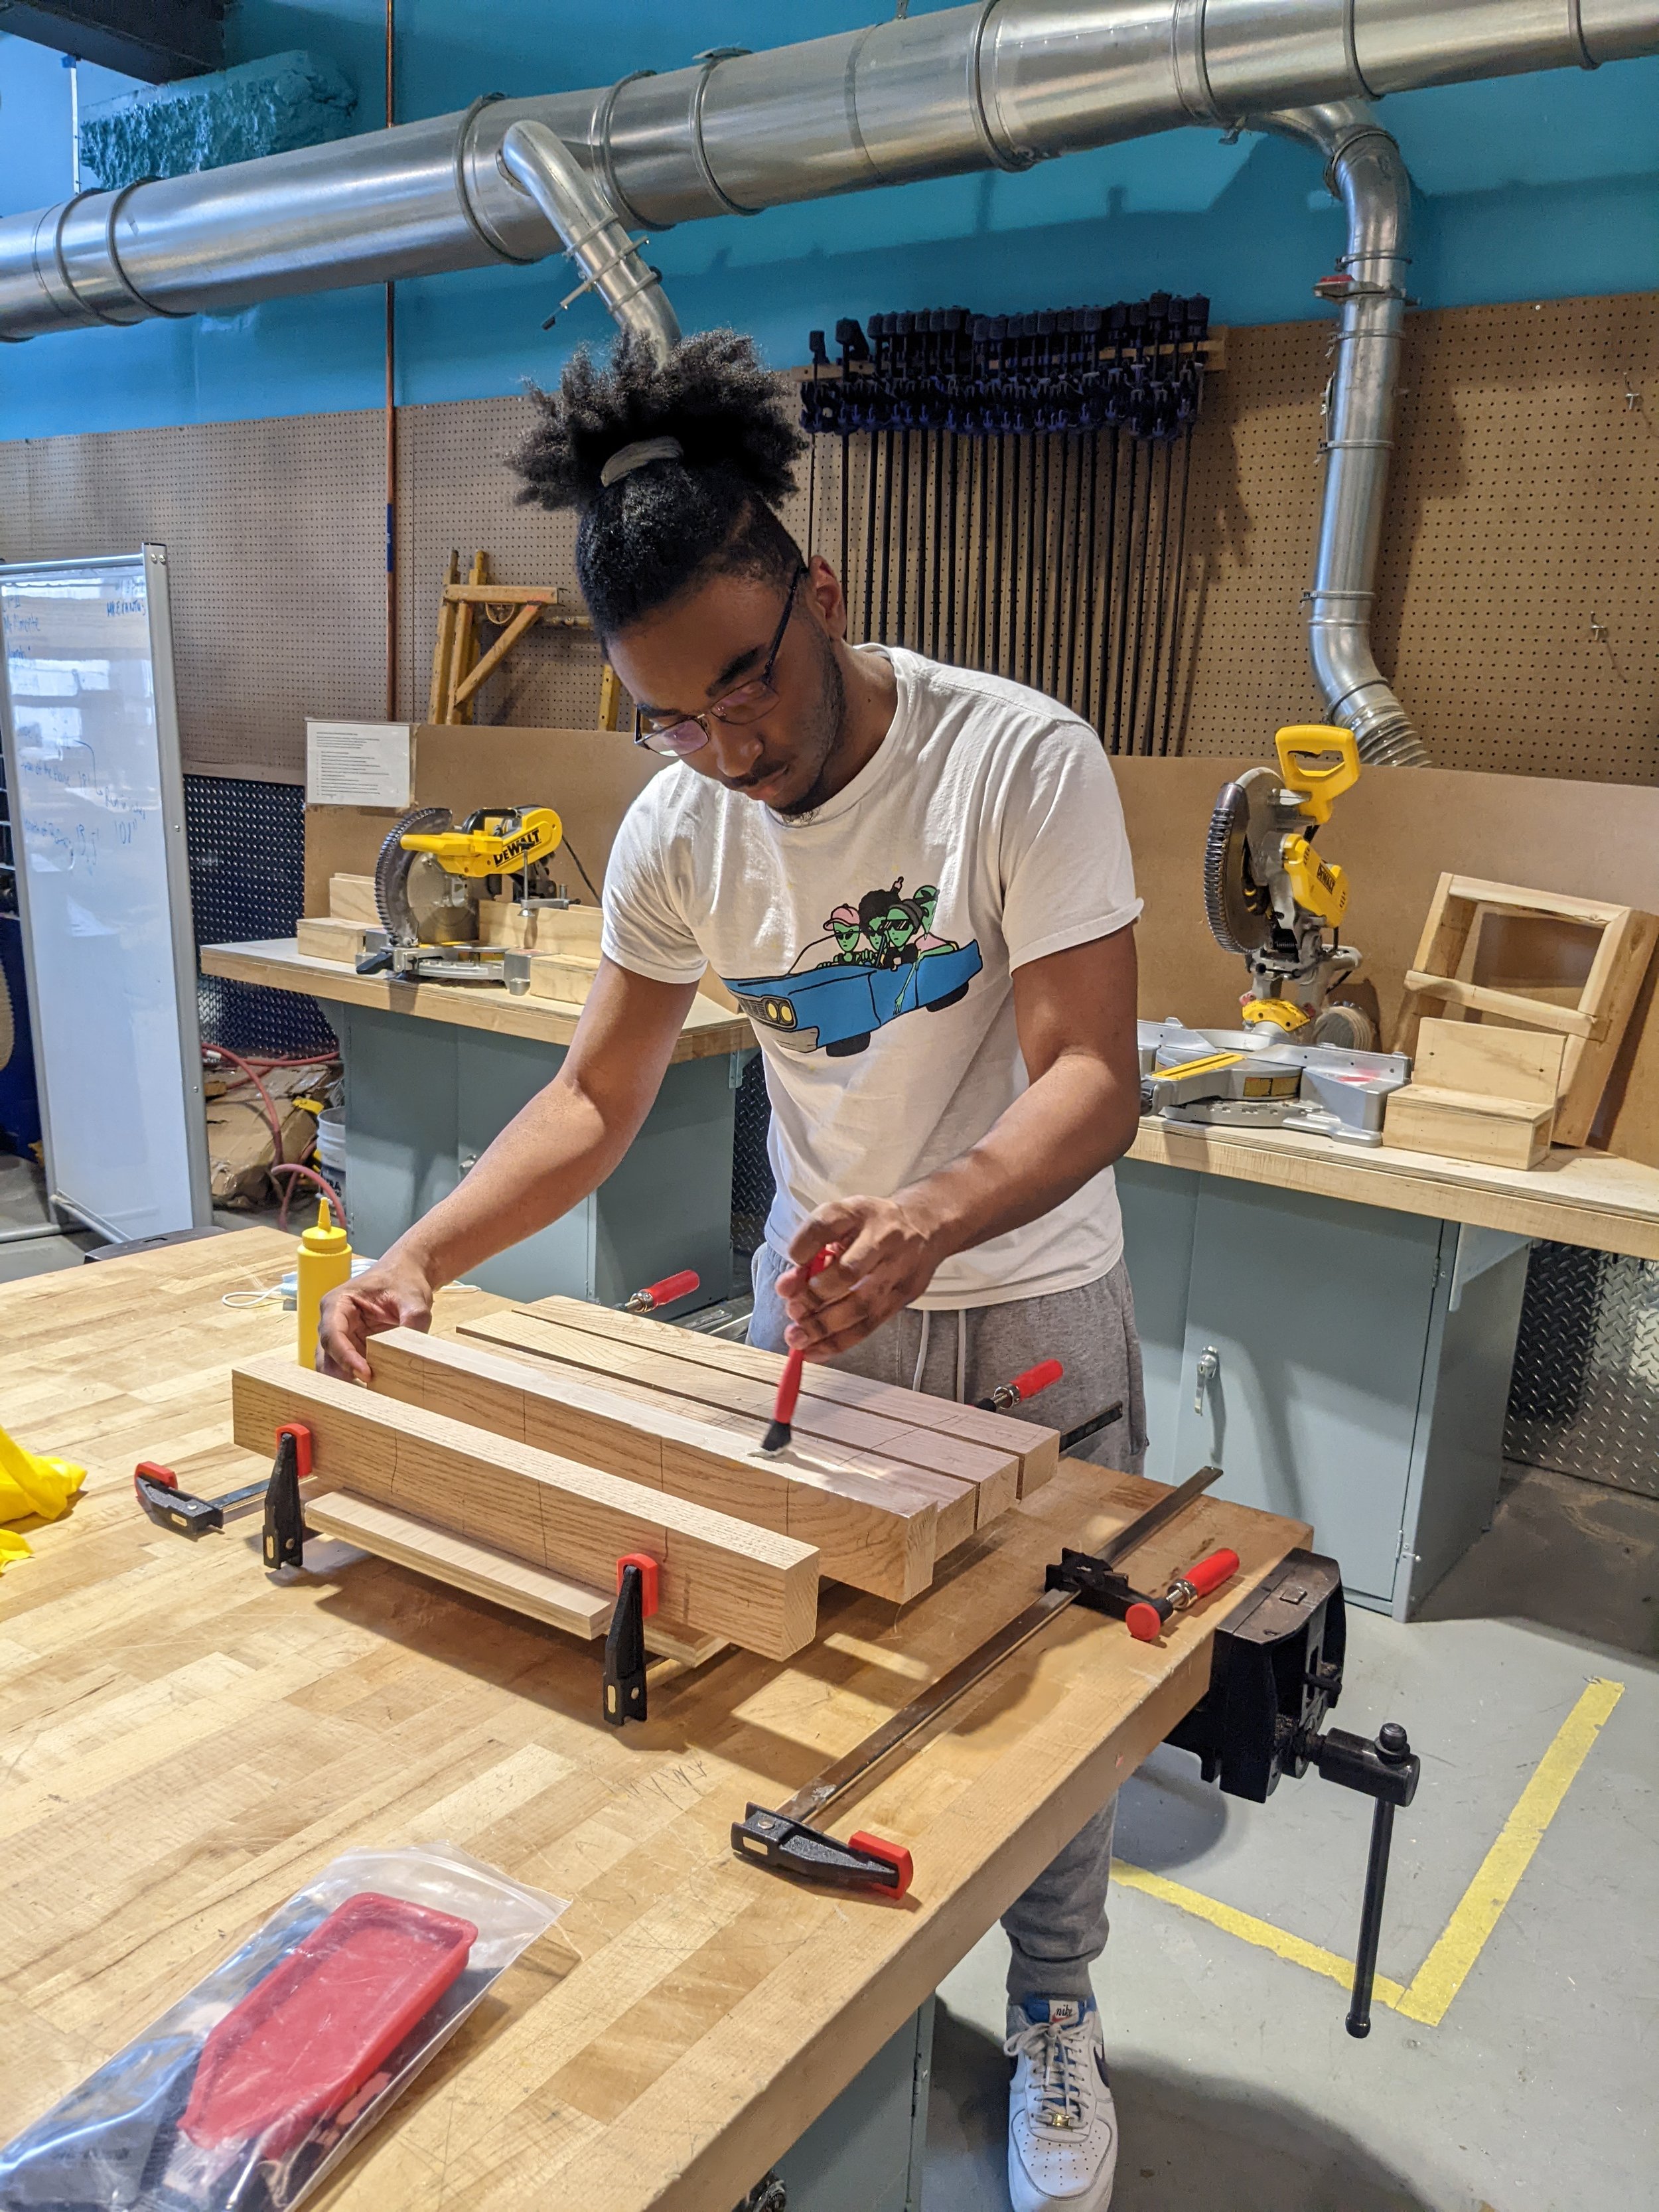 Learning to make panel glue ups